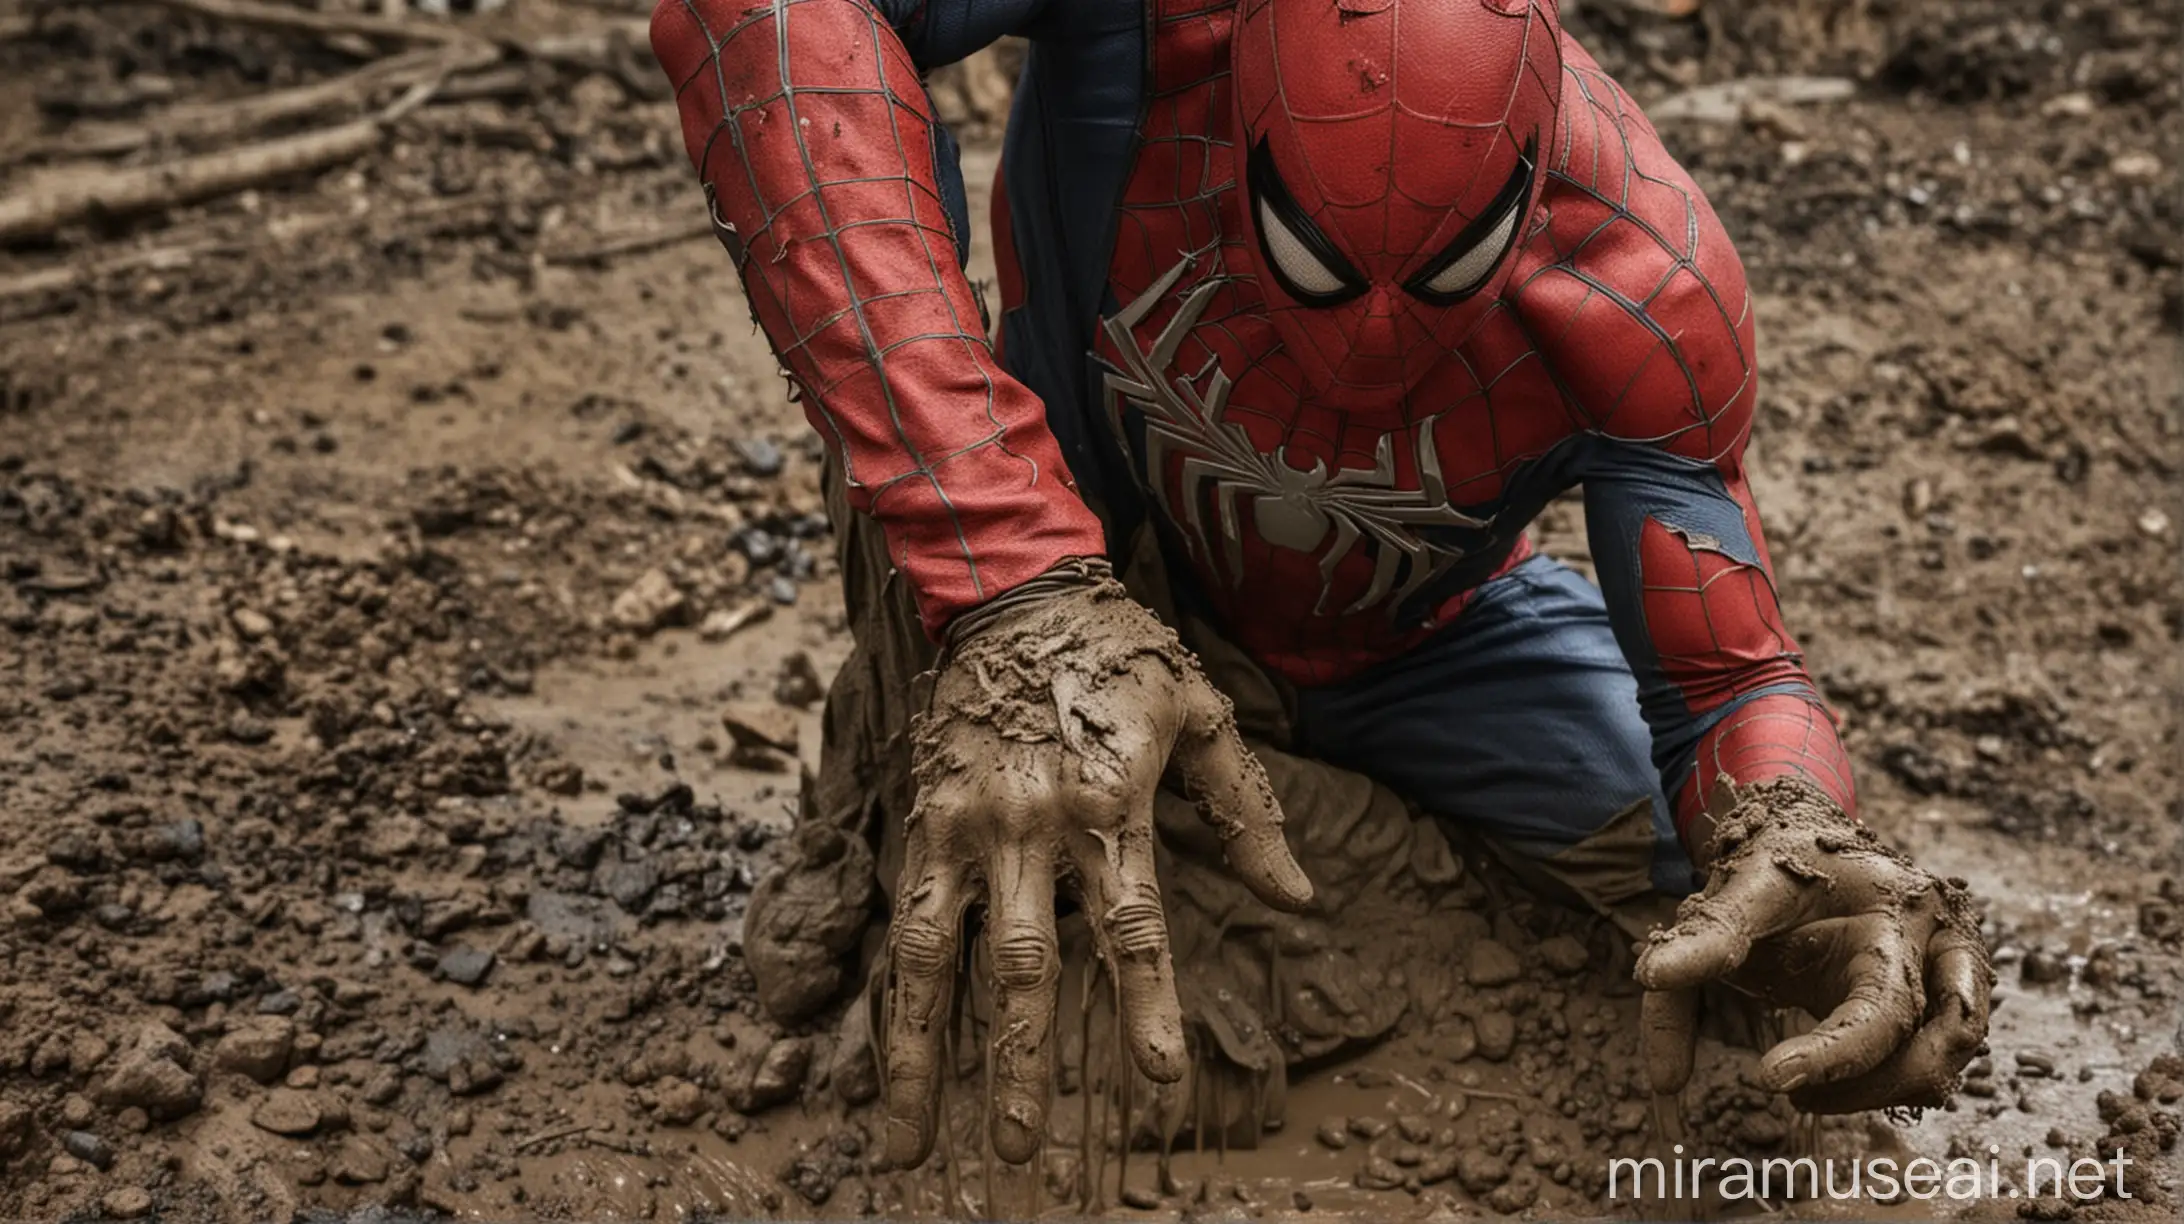 Create an image in which Spider-Man's clothes are seen being dug up and dirty with mud in the hands of a man.